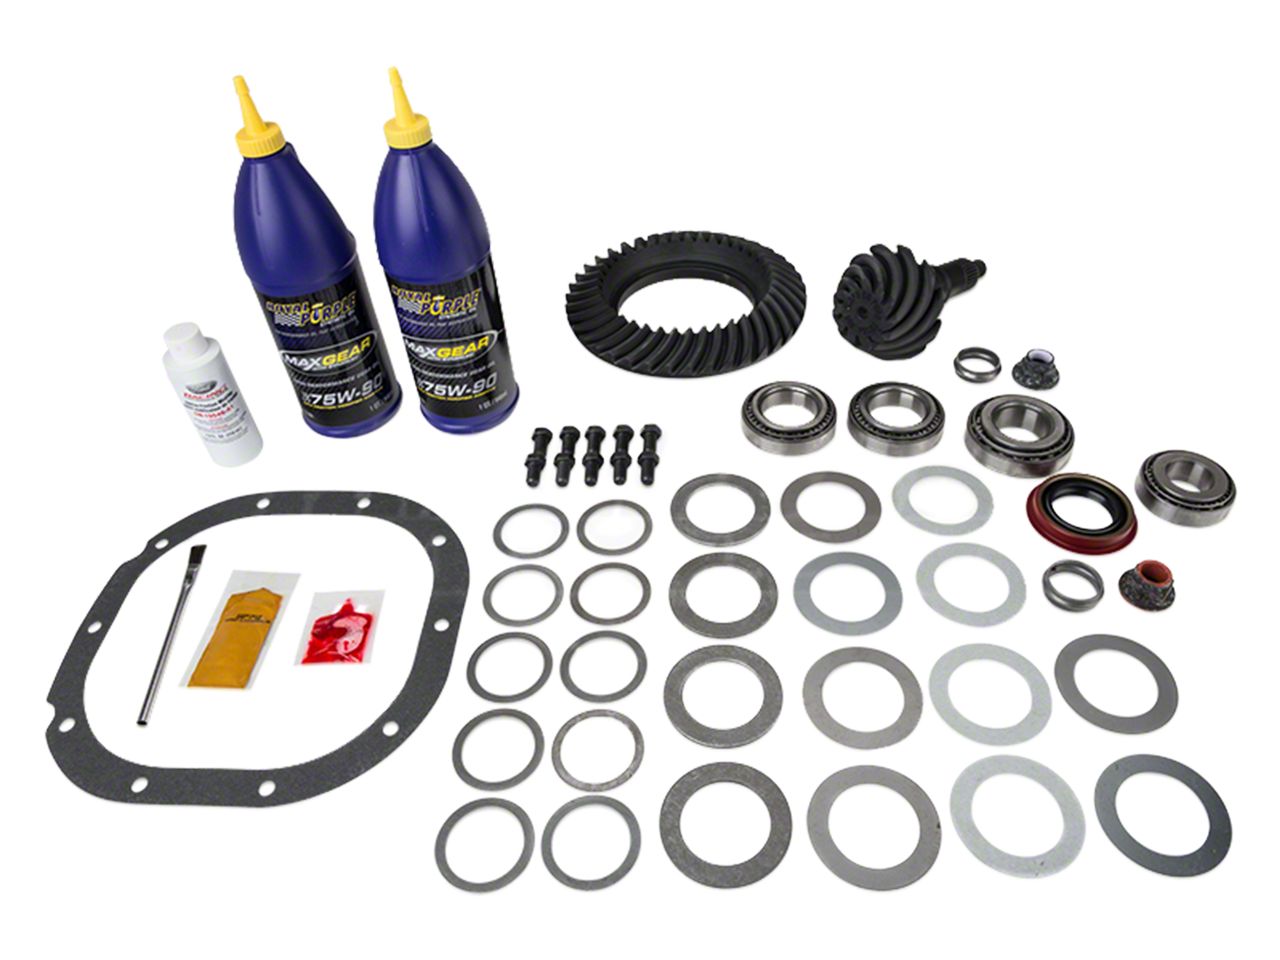 Charger Gear Kits